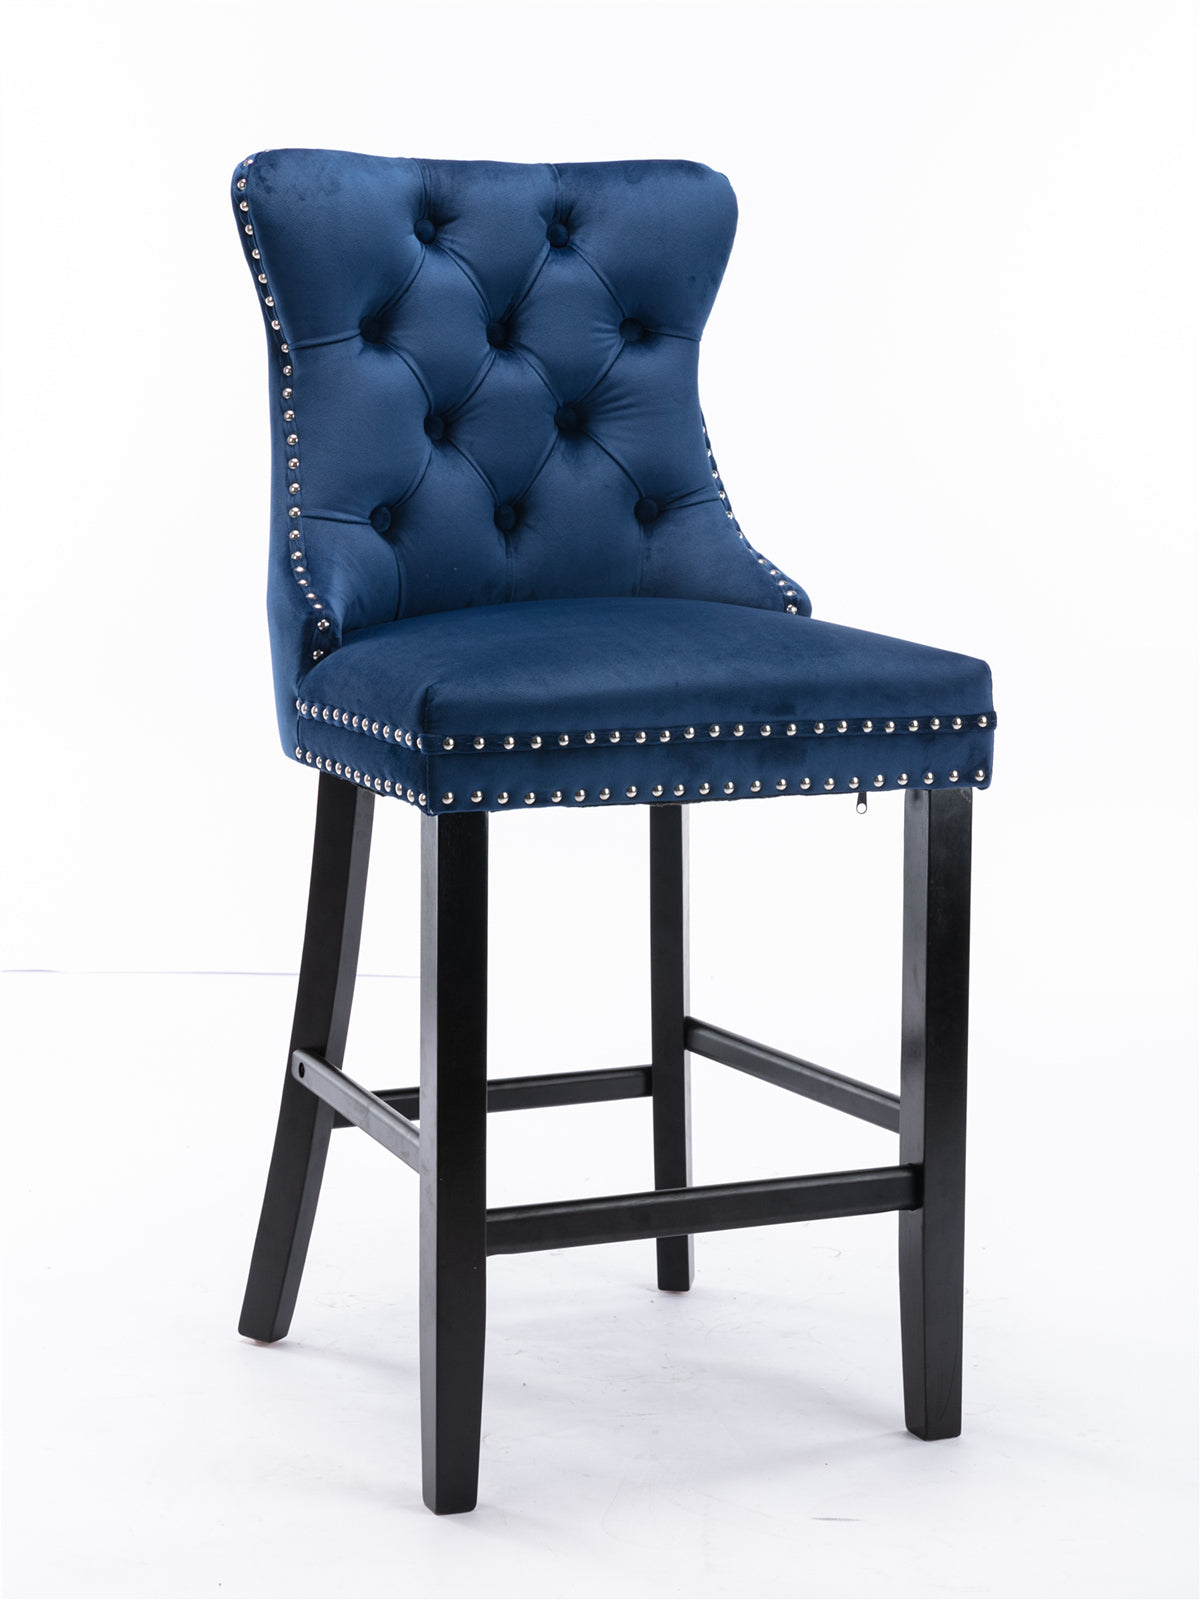 Set of 2 Blue Velvet Counter Stools Tufted Back with Nailhead Trim and Ring Pull